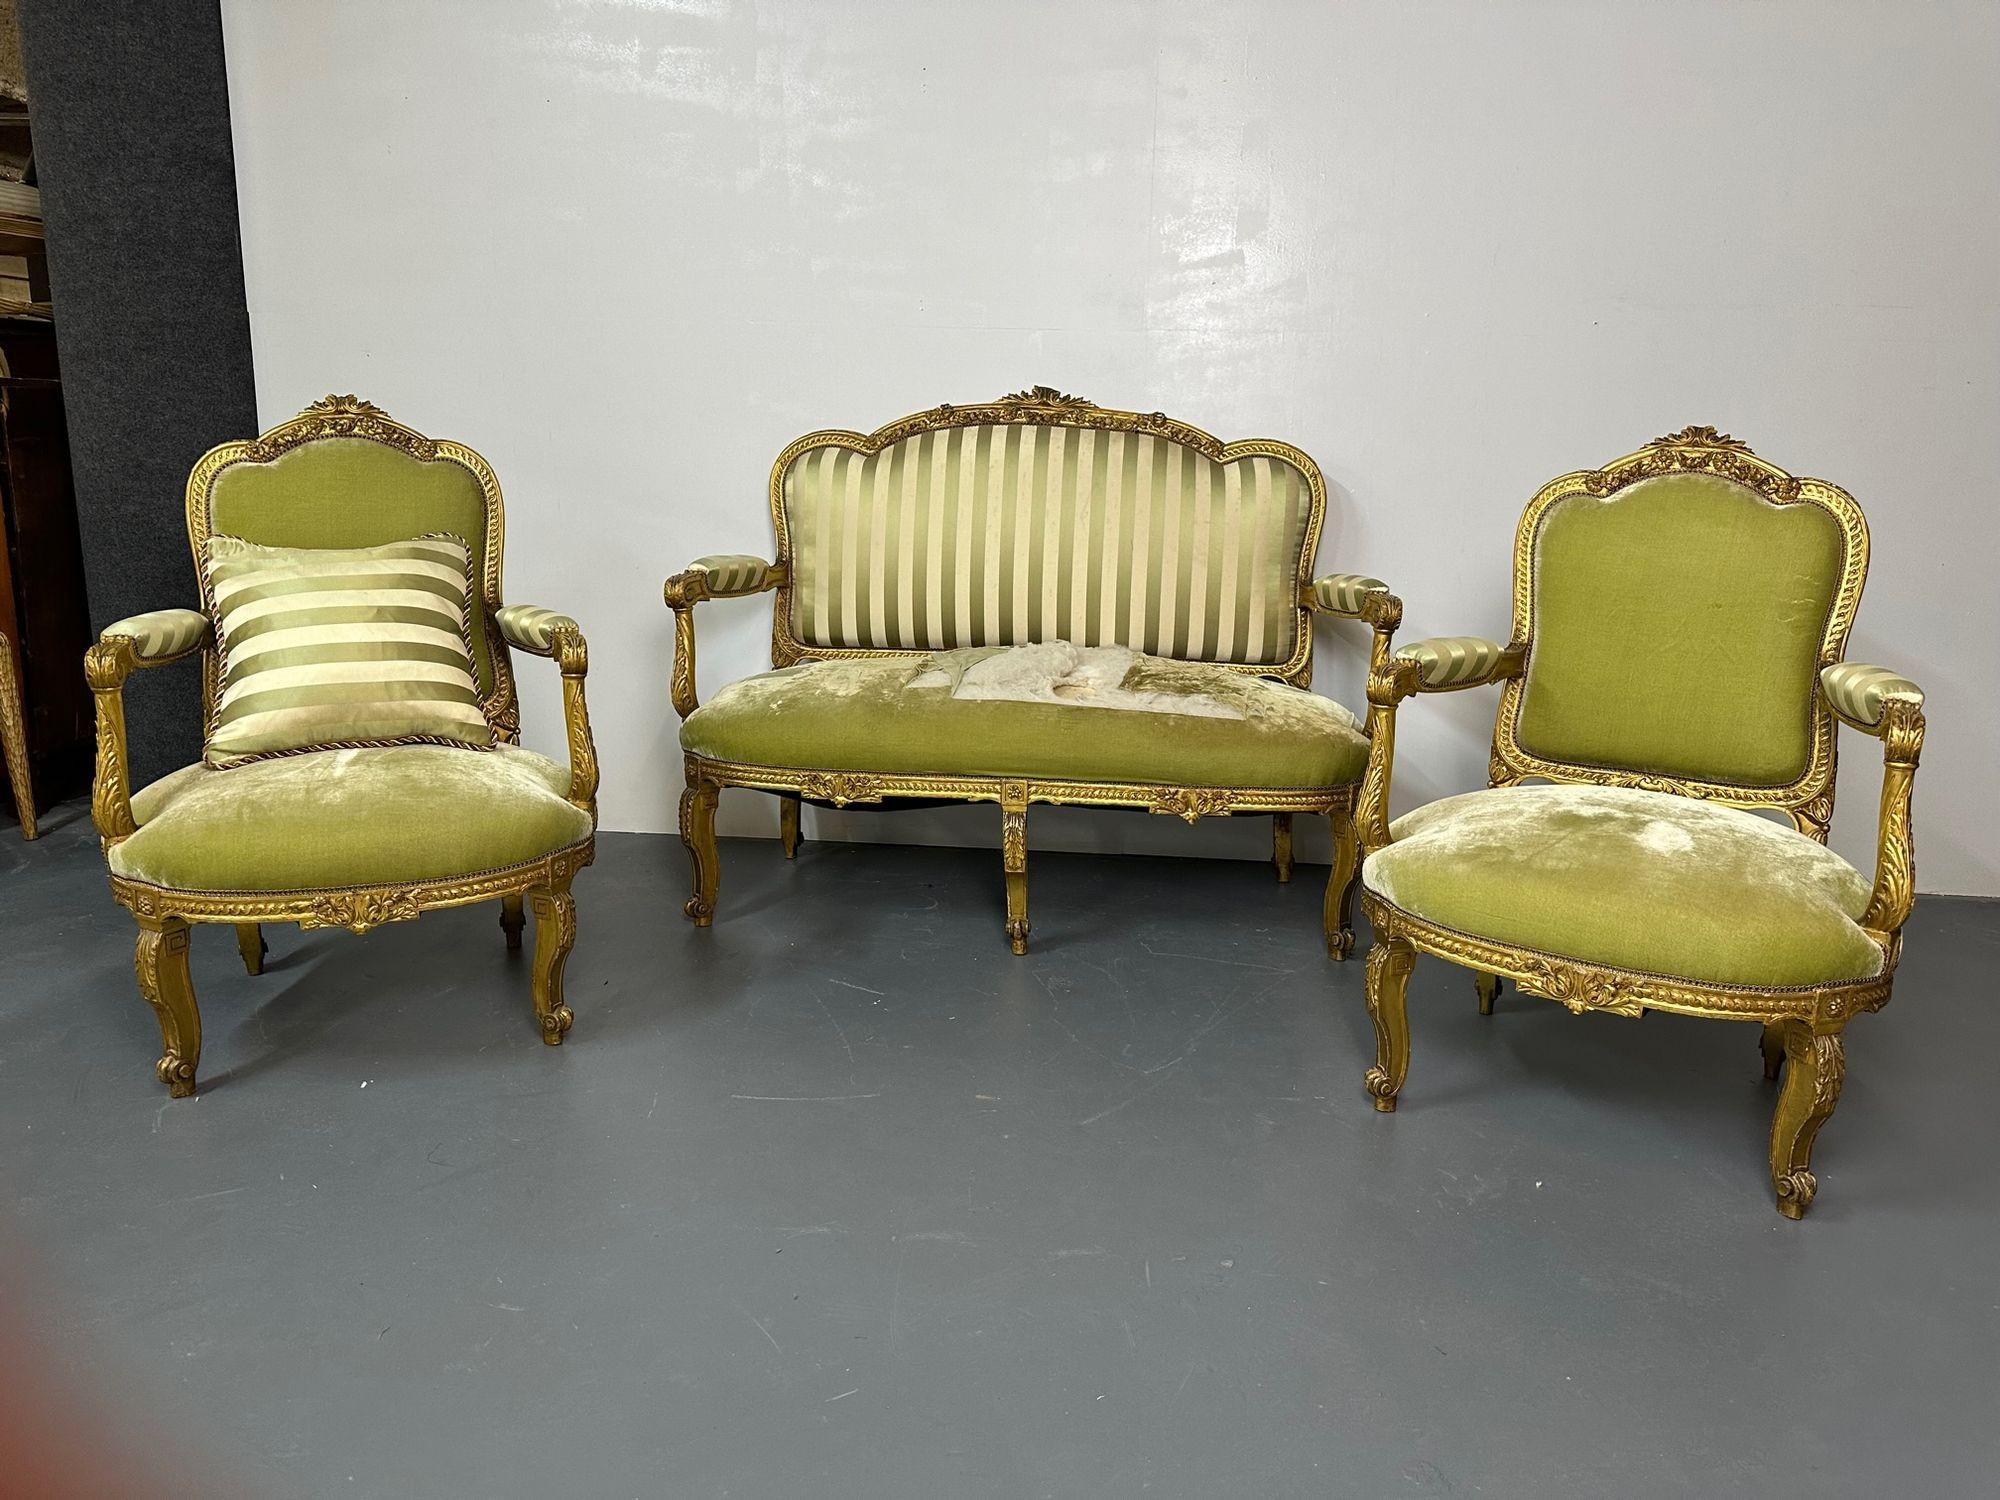 Giltwood Settee, Canape Louis XV, Durand, 19th Century, Solid Wood 10